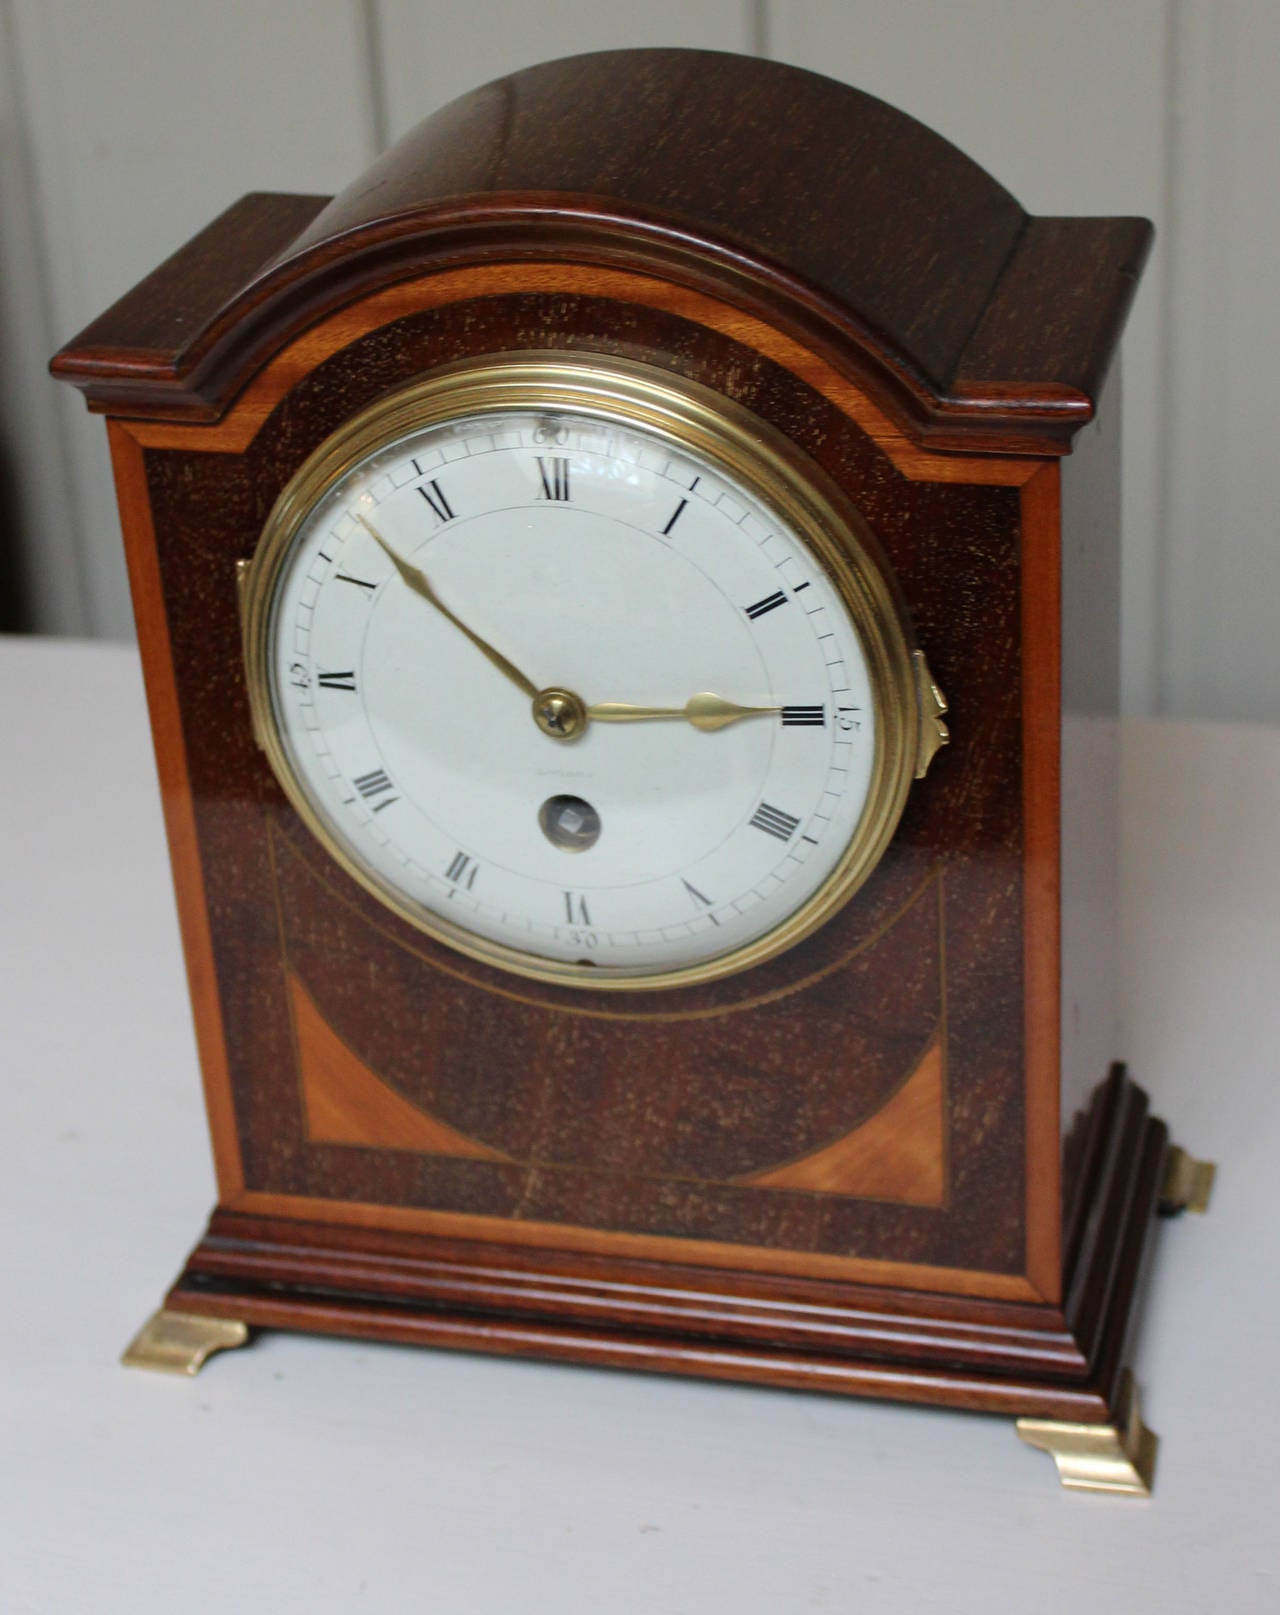 A very original and well proportioned mahogany mantel clock, dating to the early 1900s. It has a solid mahogany case, inlaid with satinwood quadrants and boxwood stringing. It has a convex bevel edge glass and a convex enamel dial. The French